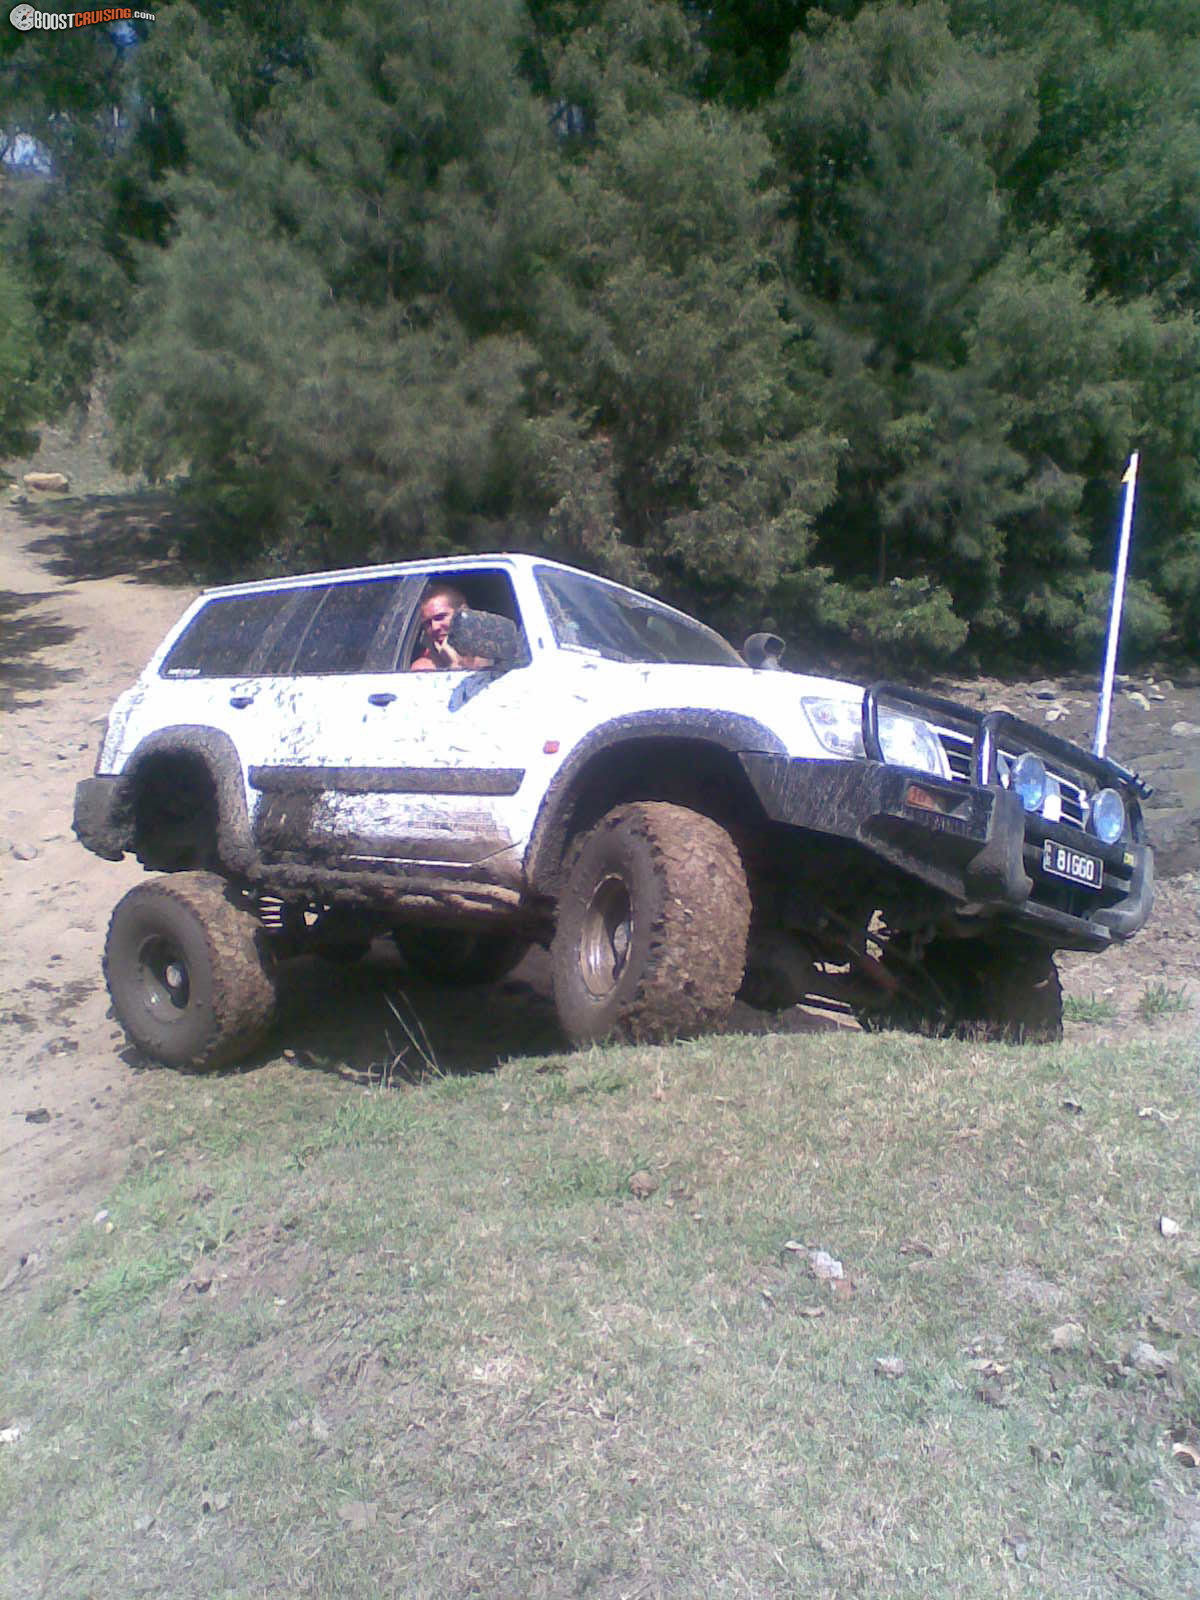 Nissan Patrol 4x4 Ute â€” a model manufactured by Nissan.